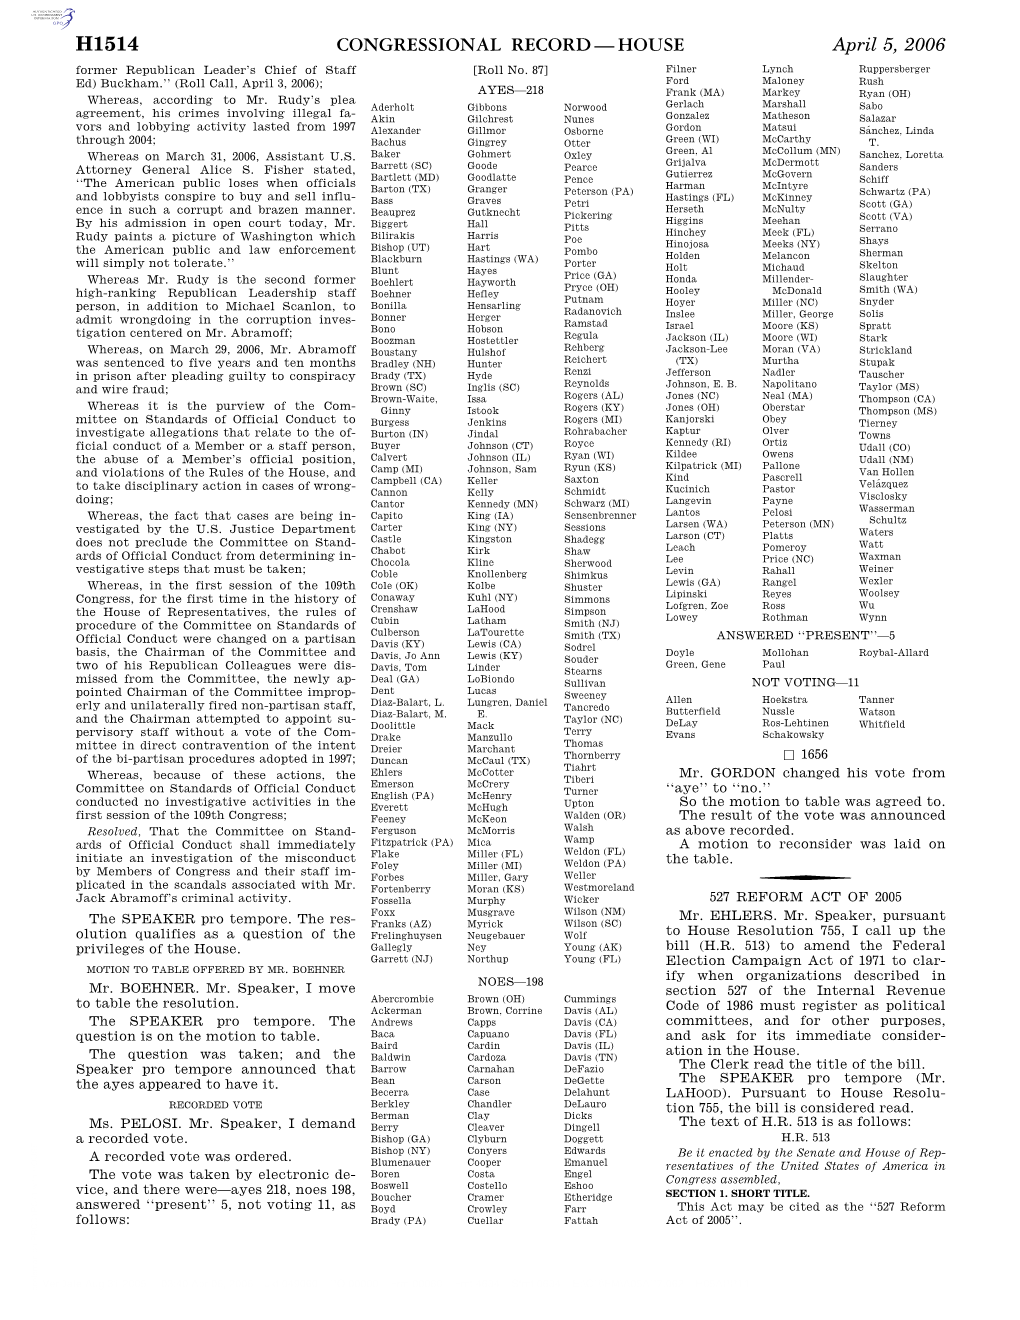 Congressional Record—House H1514